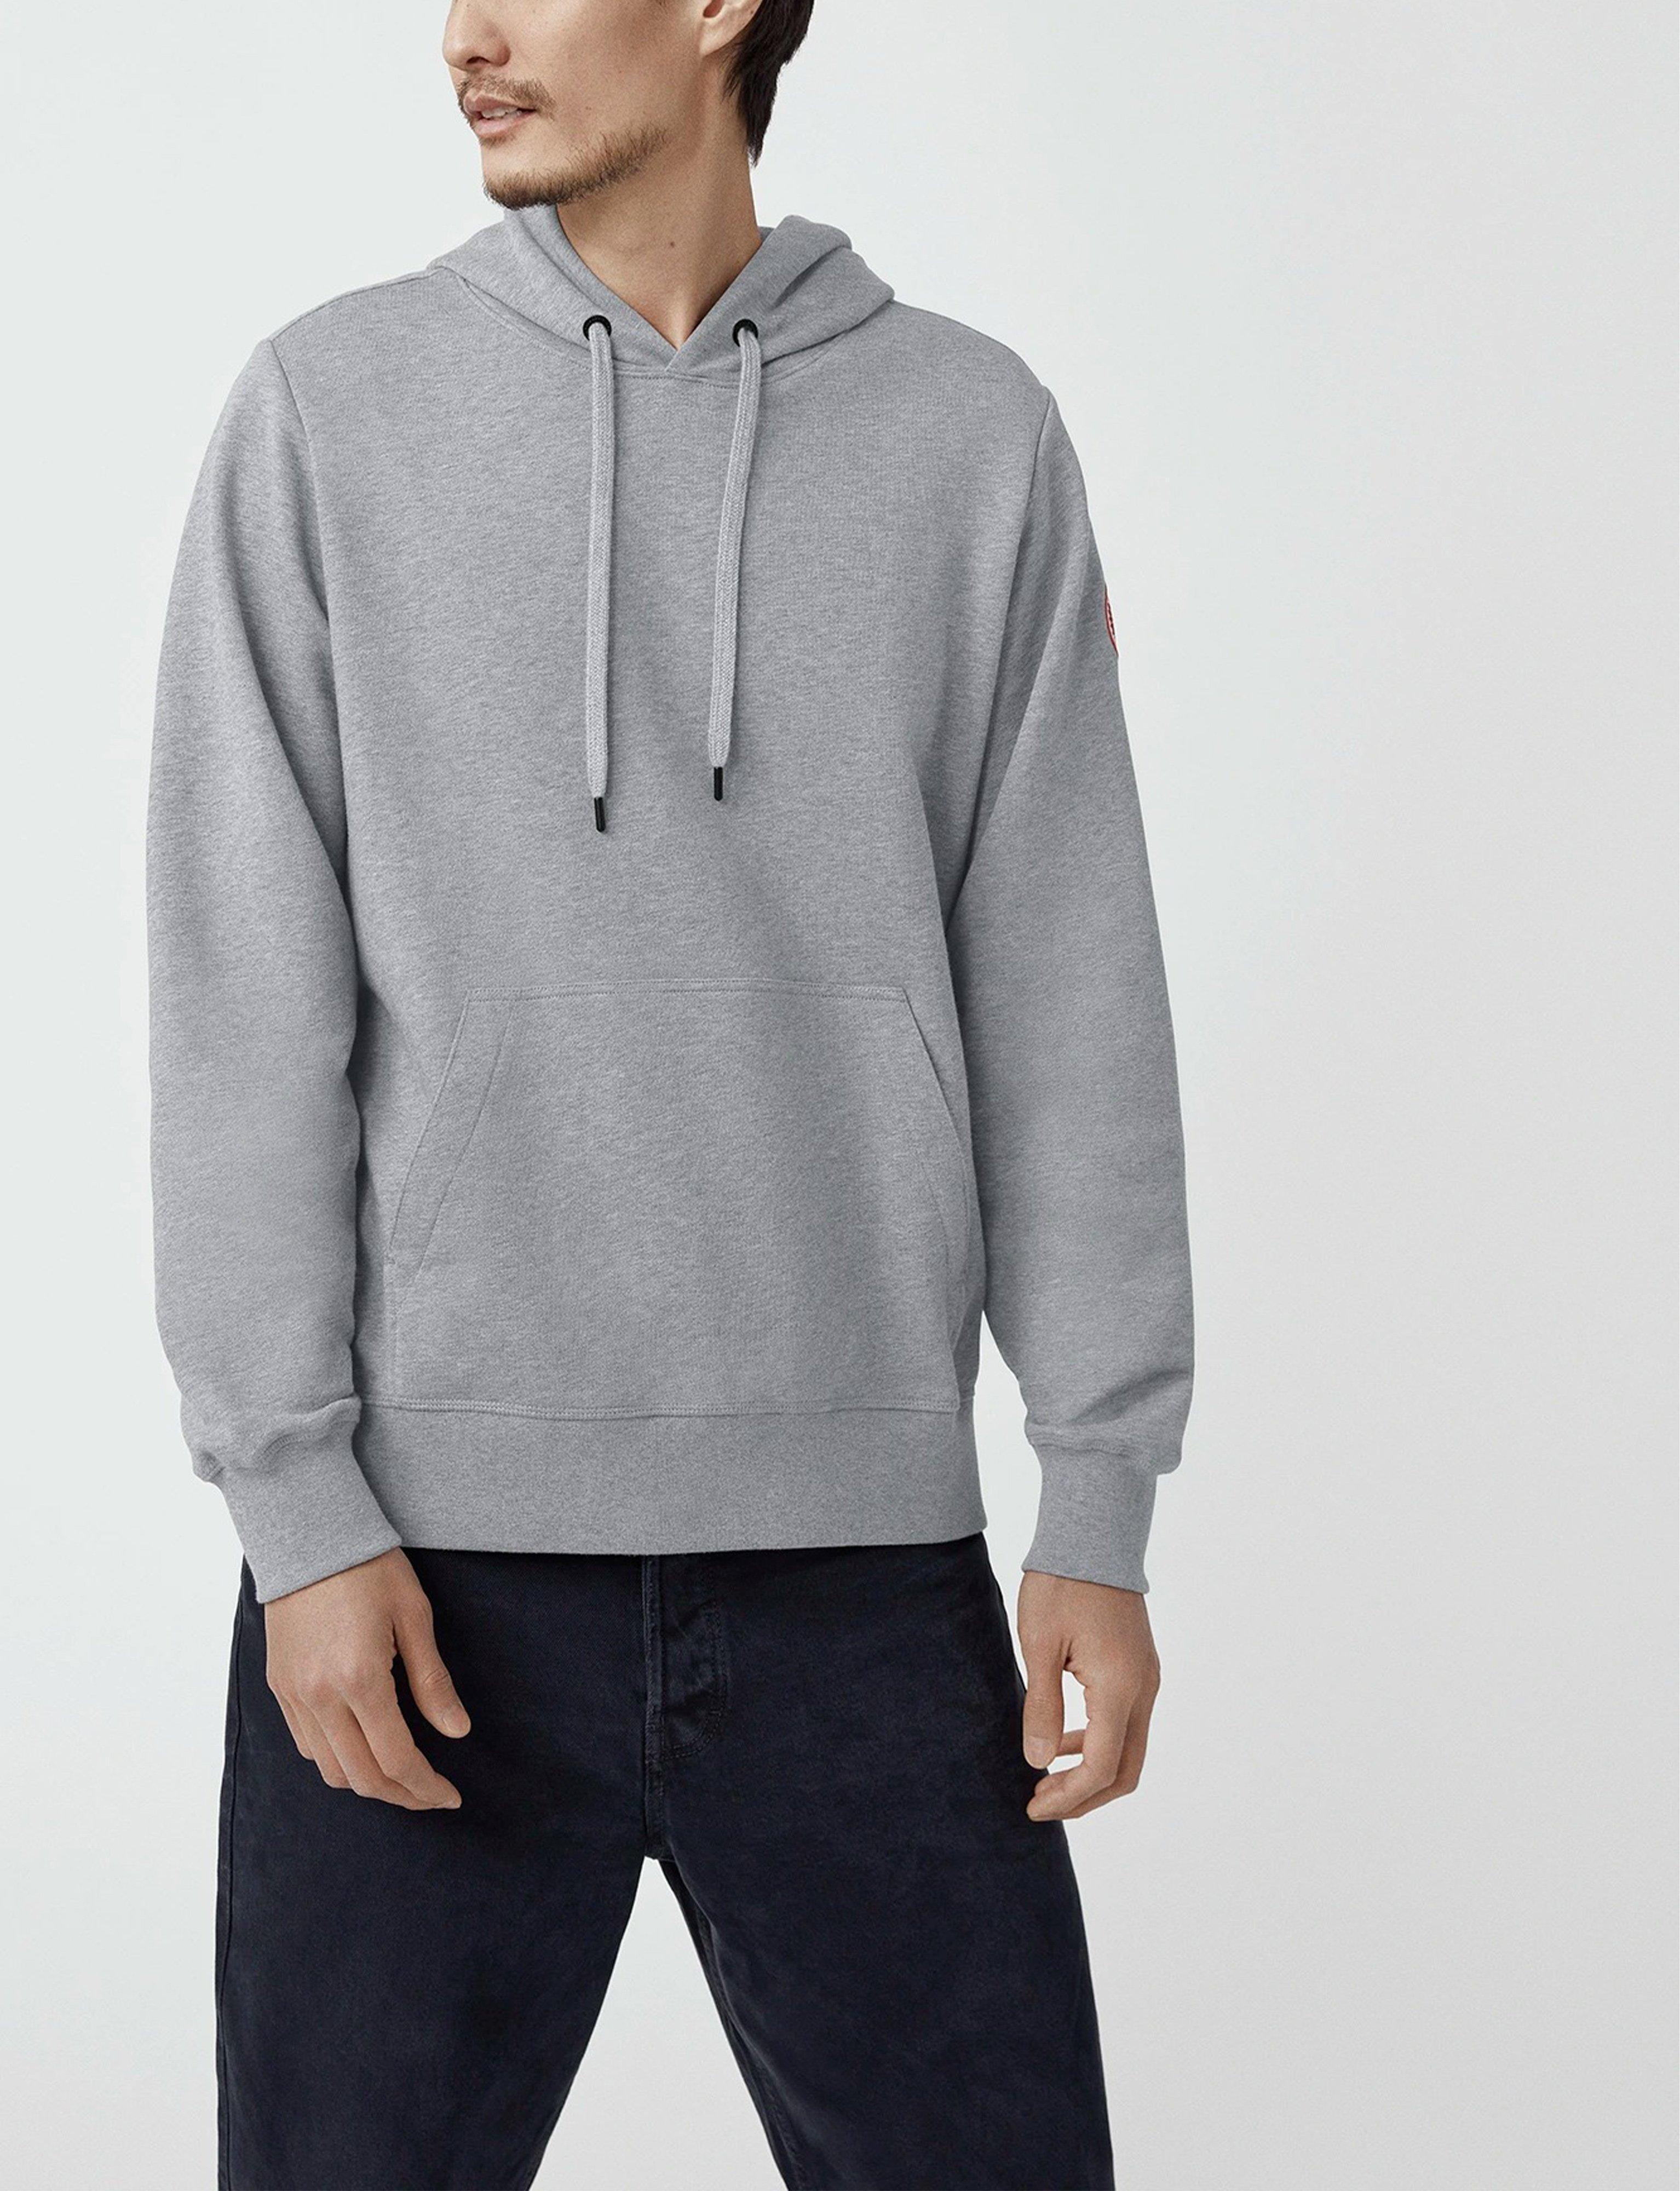 Huron Hooded Sweater image 1